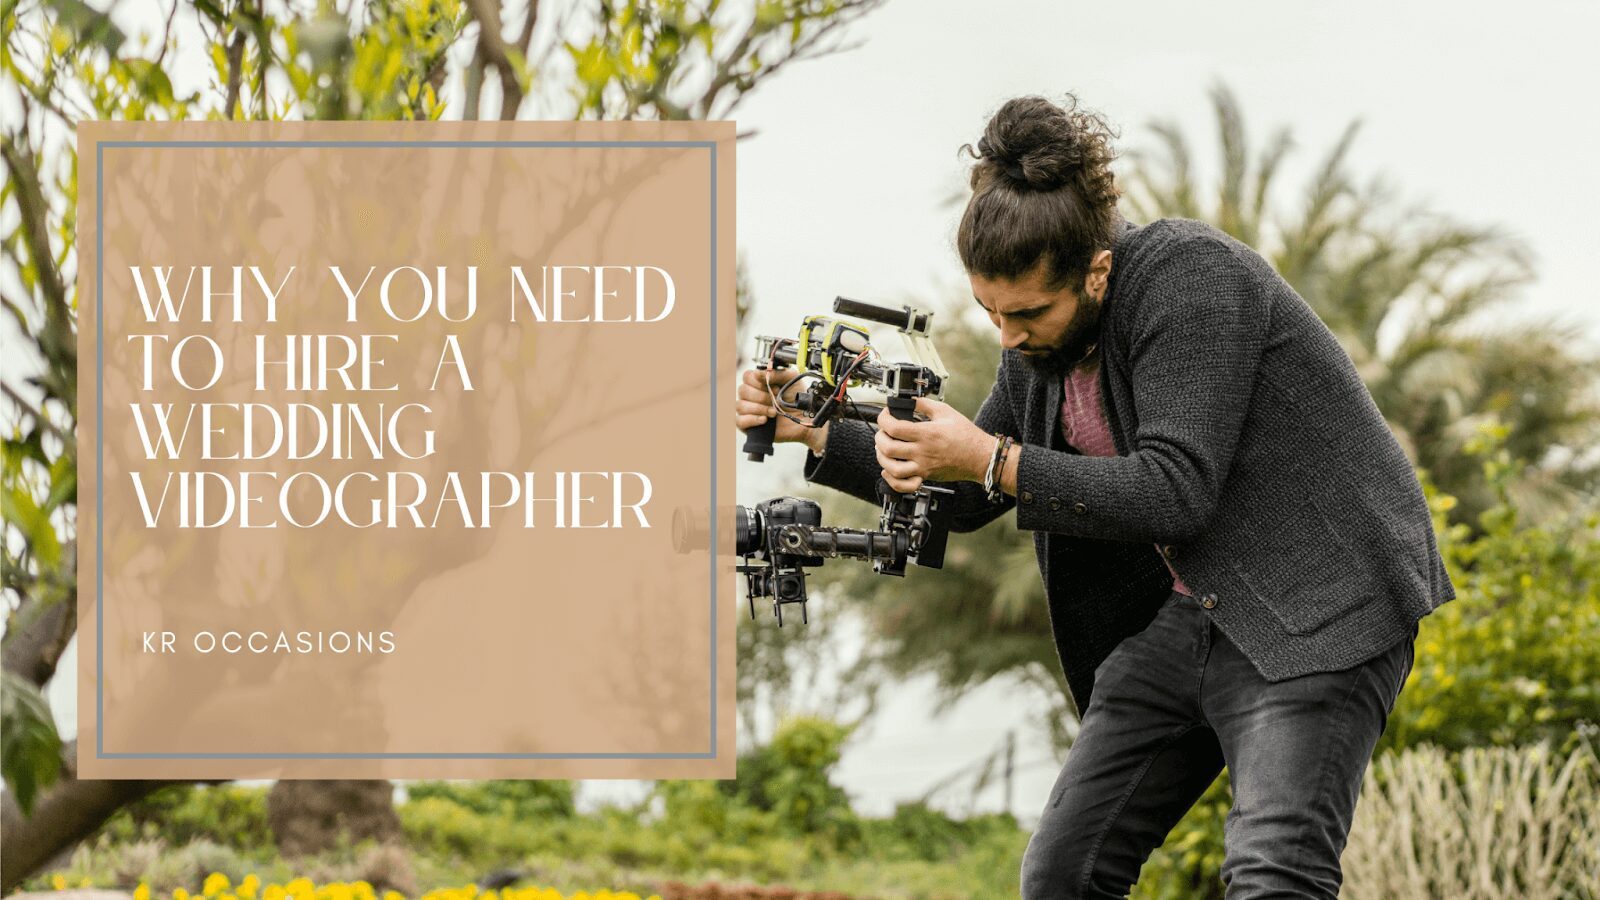 Why You Need to Hire a Wedding Videographer